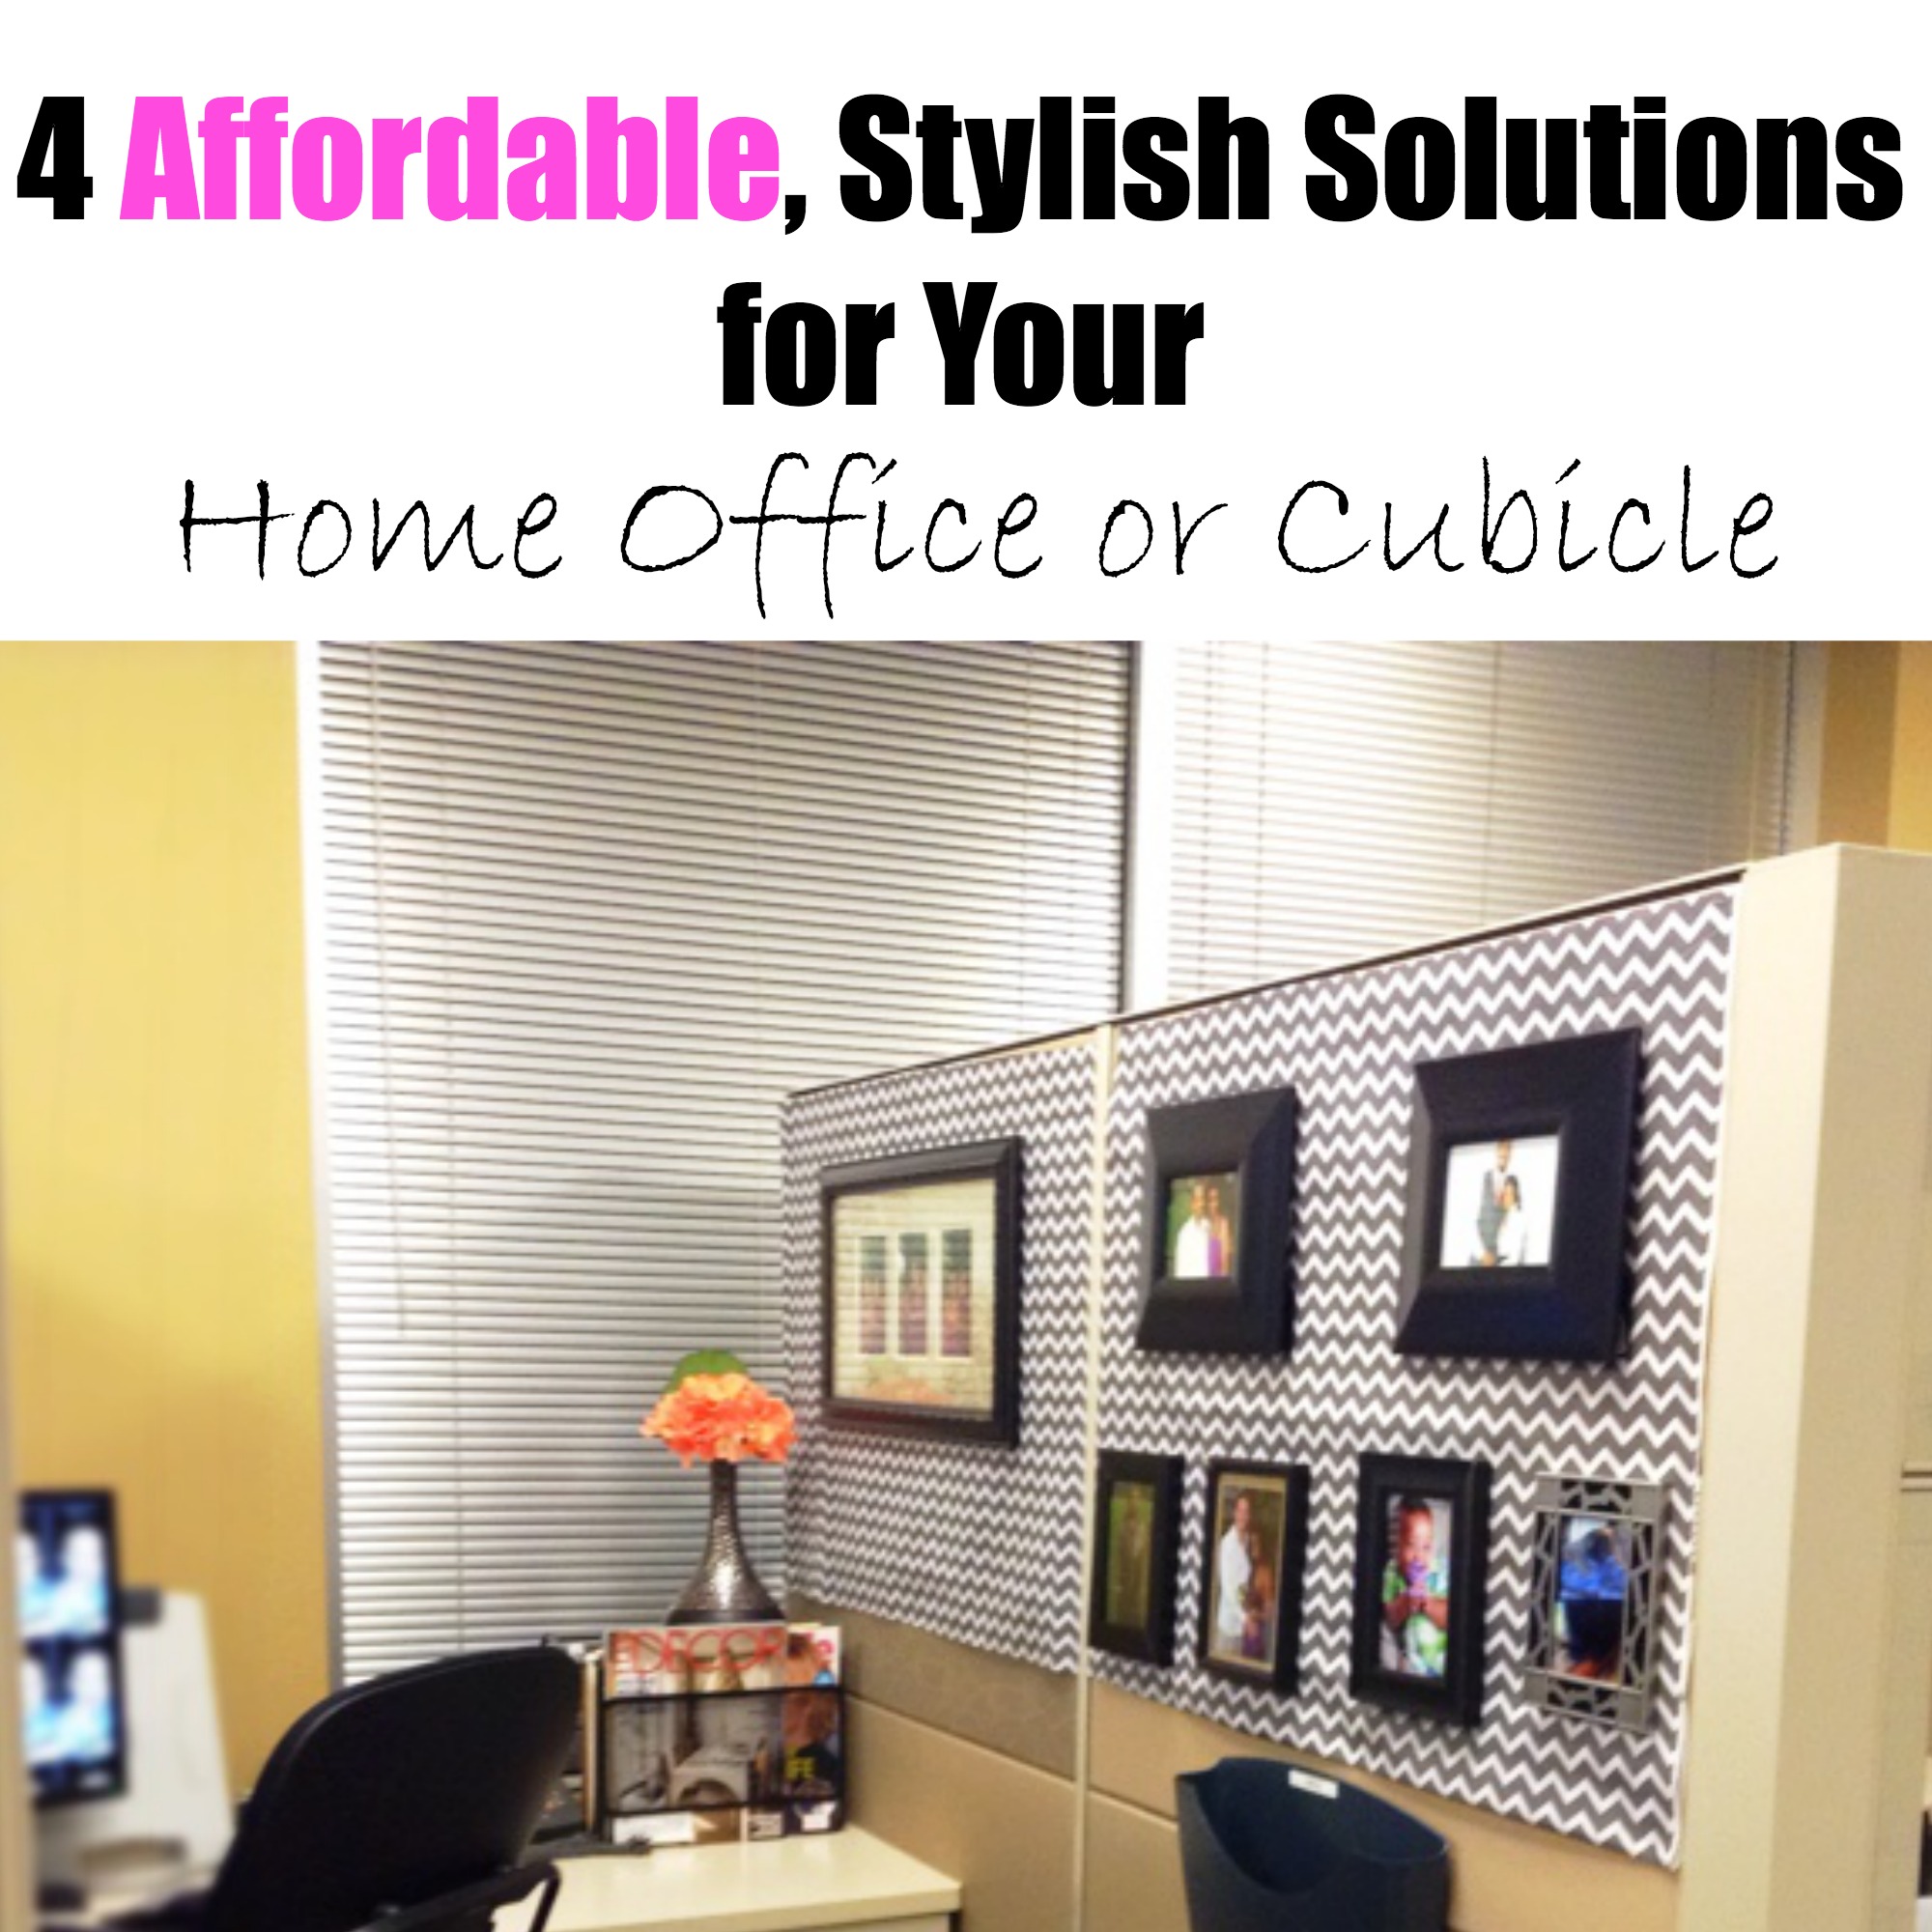 17 Desk Decor Ideas for Workplace and Cubicle Decor